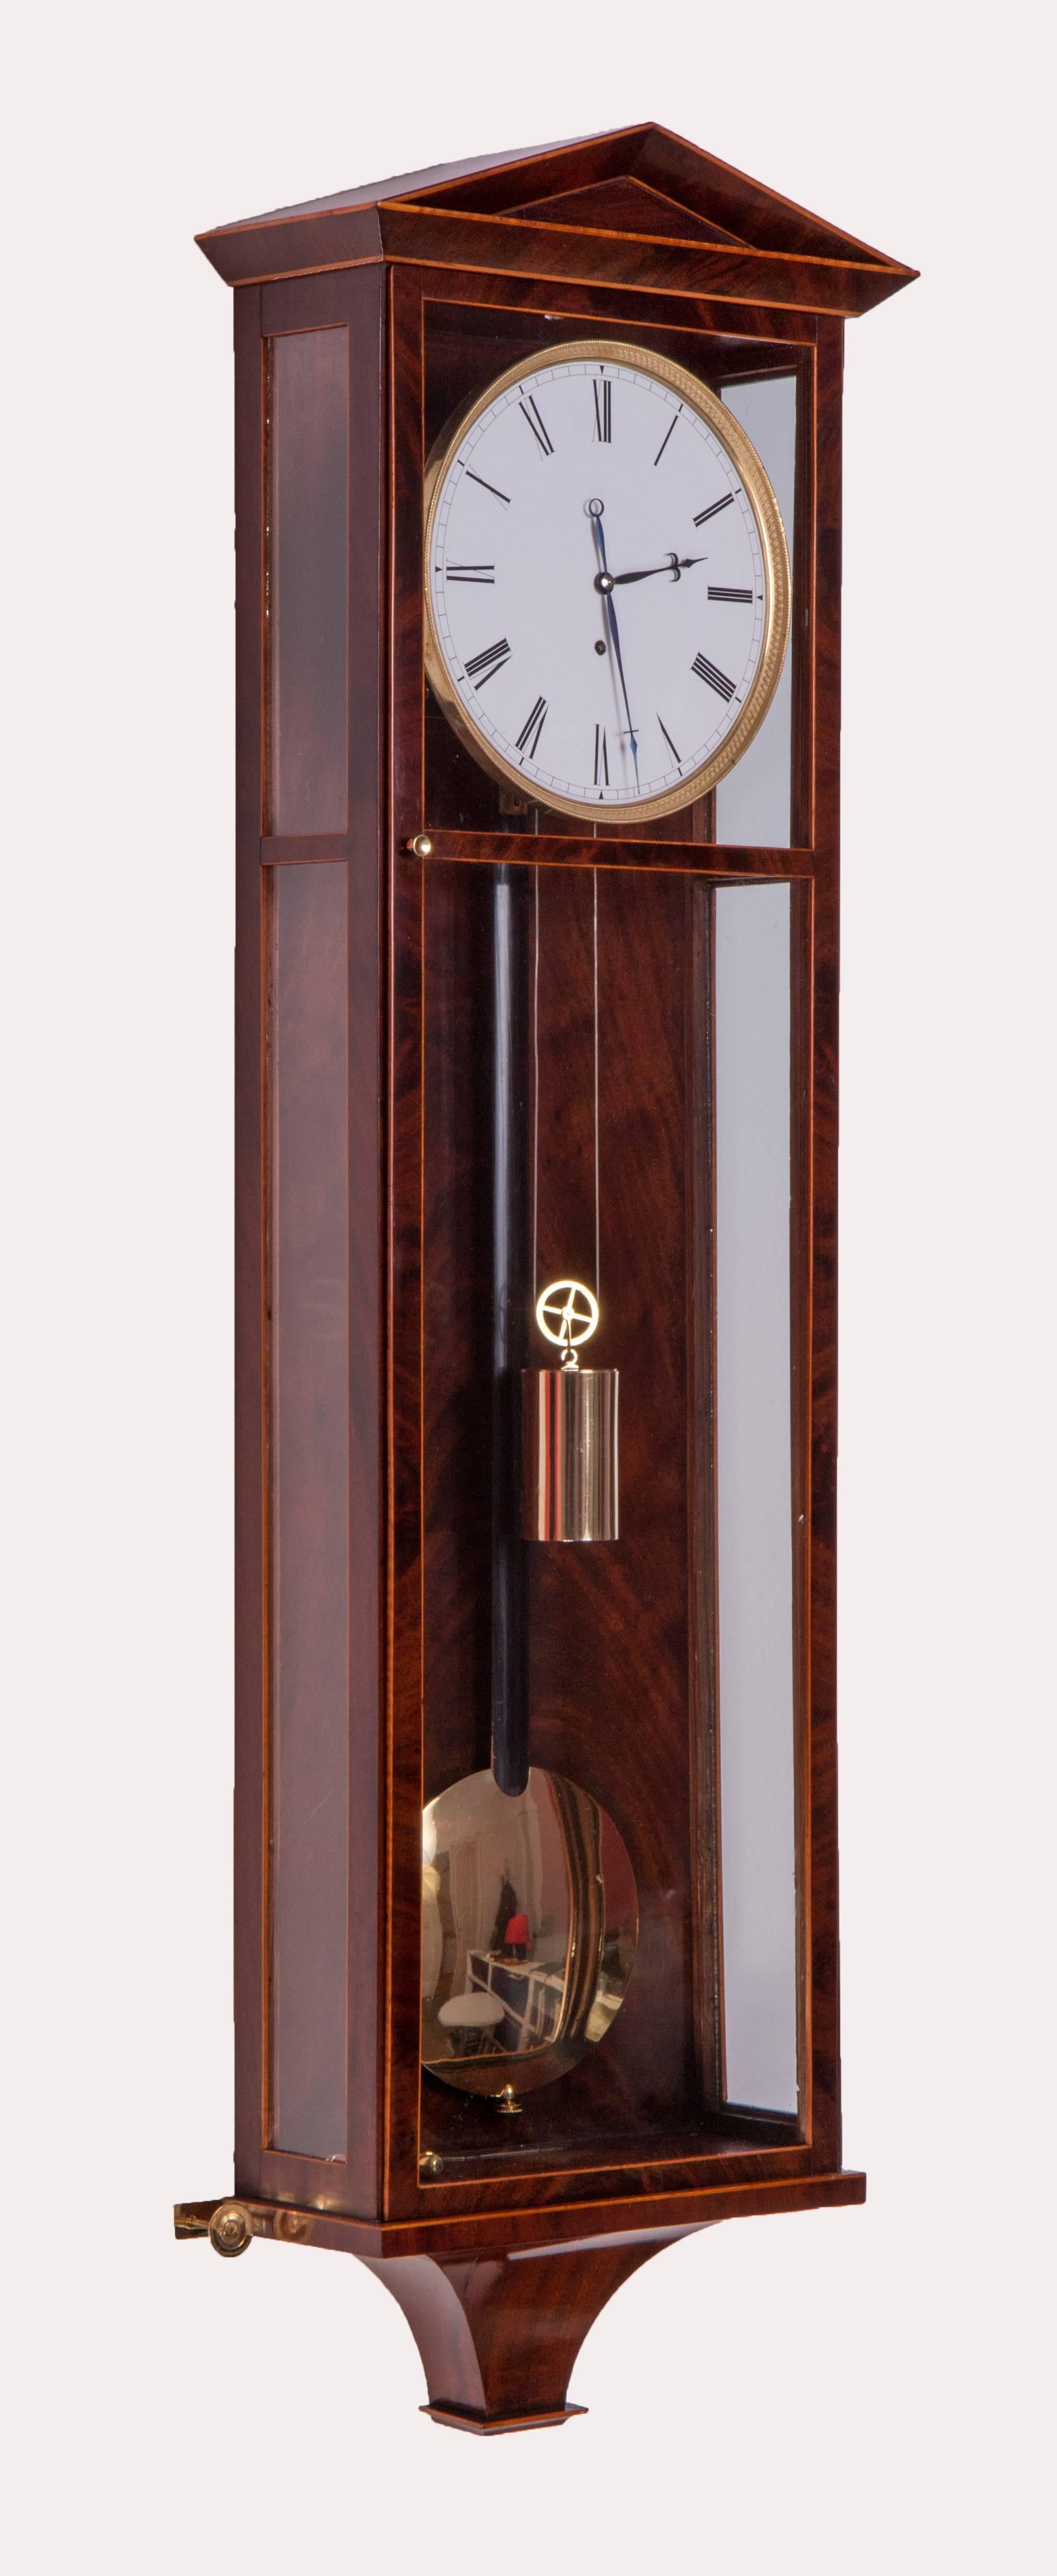 Mark on the plate: “AP”: Anton Pohl?, Vienna circa 1830
Length: 88 cm, duration: eight days
Mahogany veneered case with maple stringing, enamel dial, blued steel hands, engine turned gilt bezel, deadbeat escapement, spring suspension, wood rod